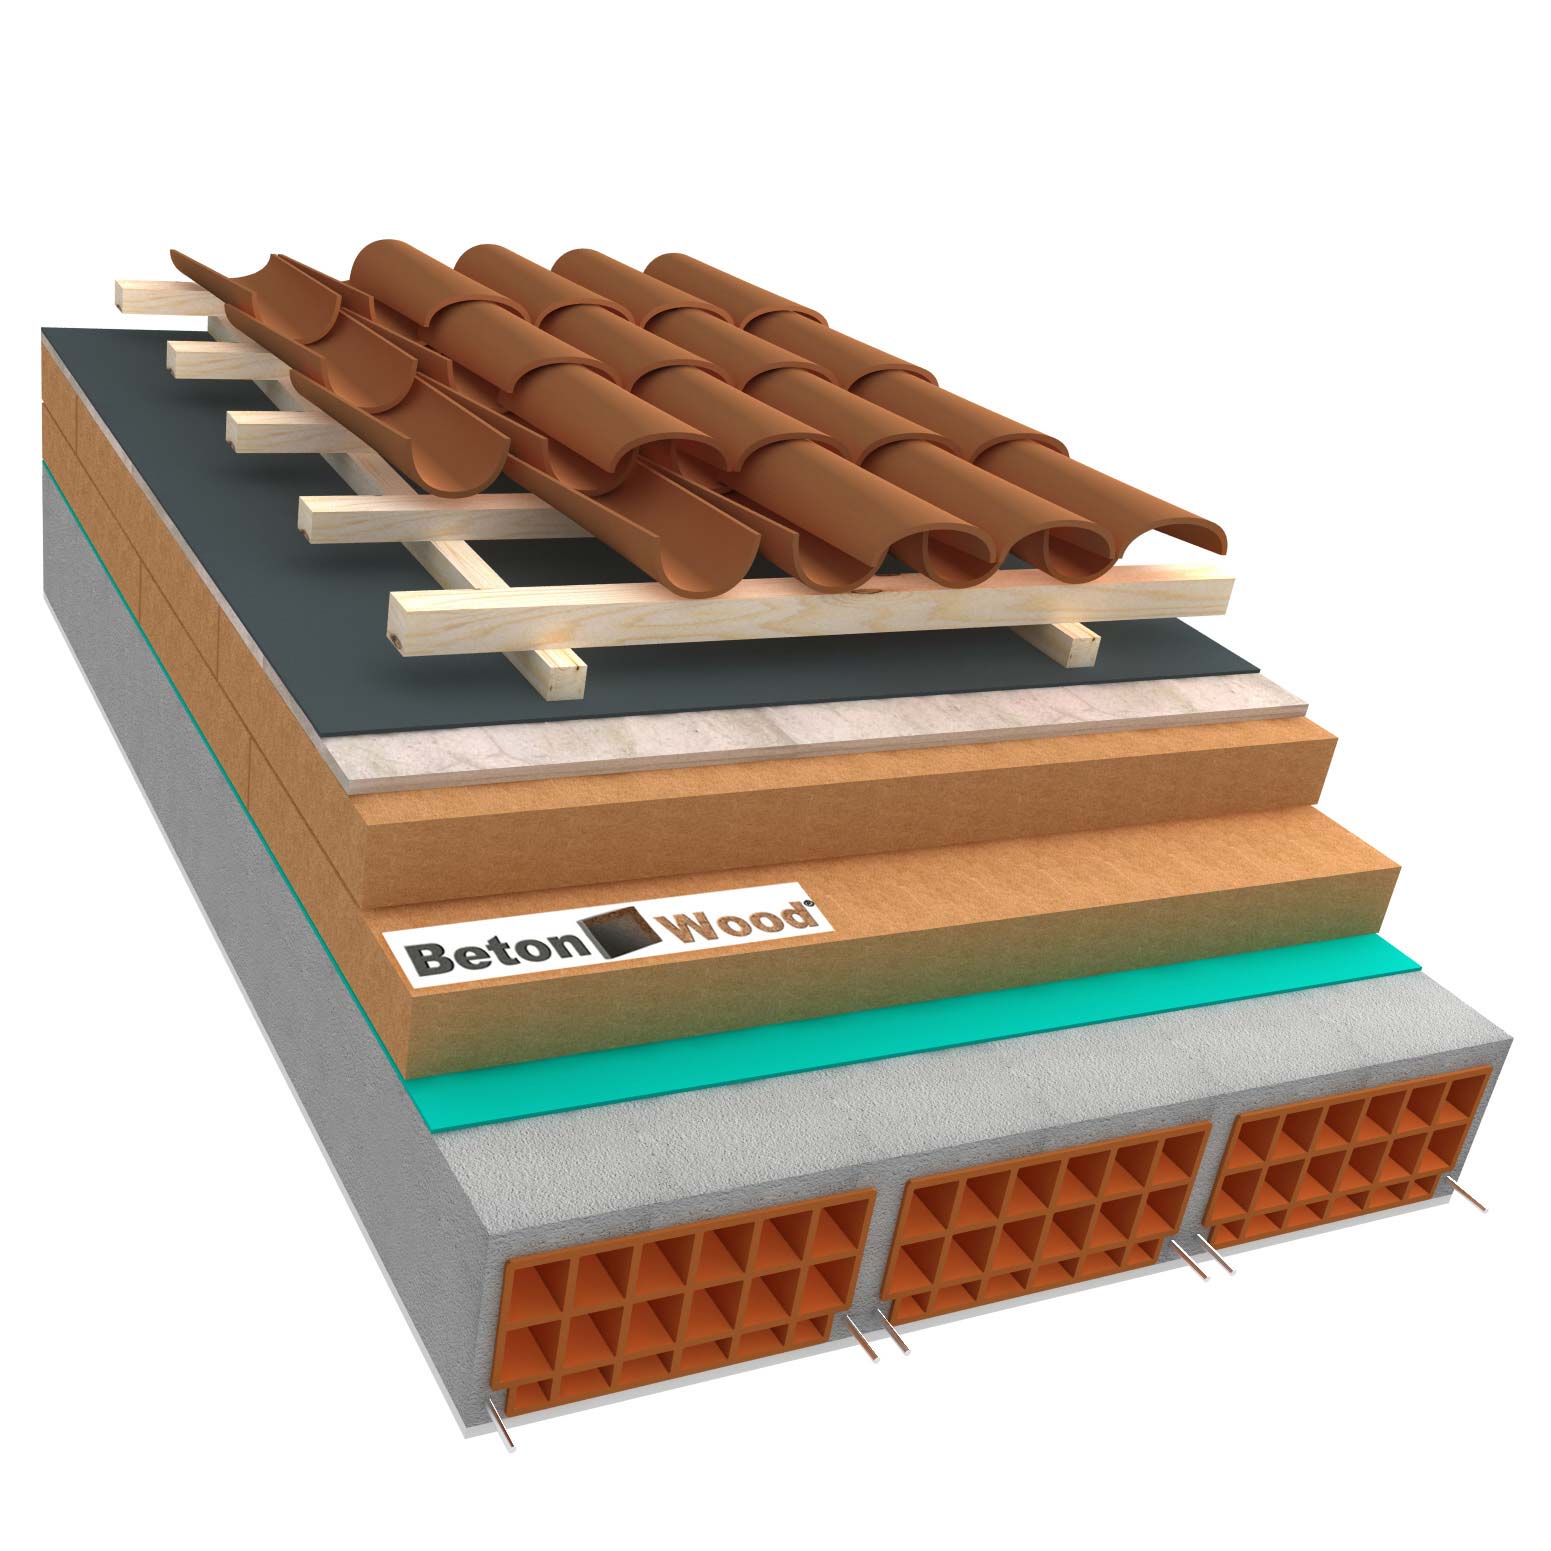 Ventilated roof with fiber wood Universal dry and cement bonded particle boards on concrete